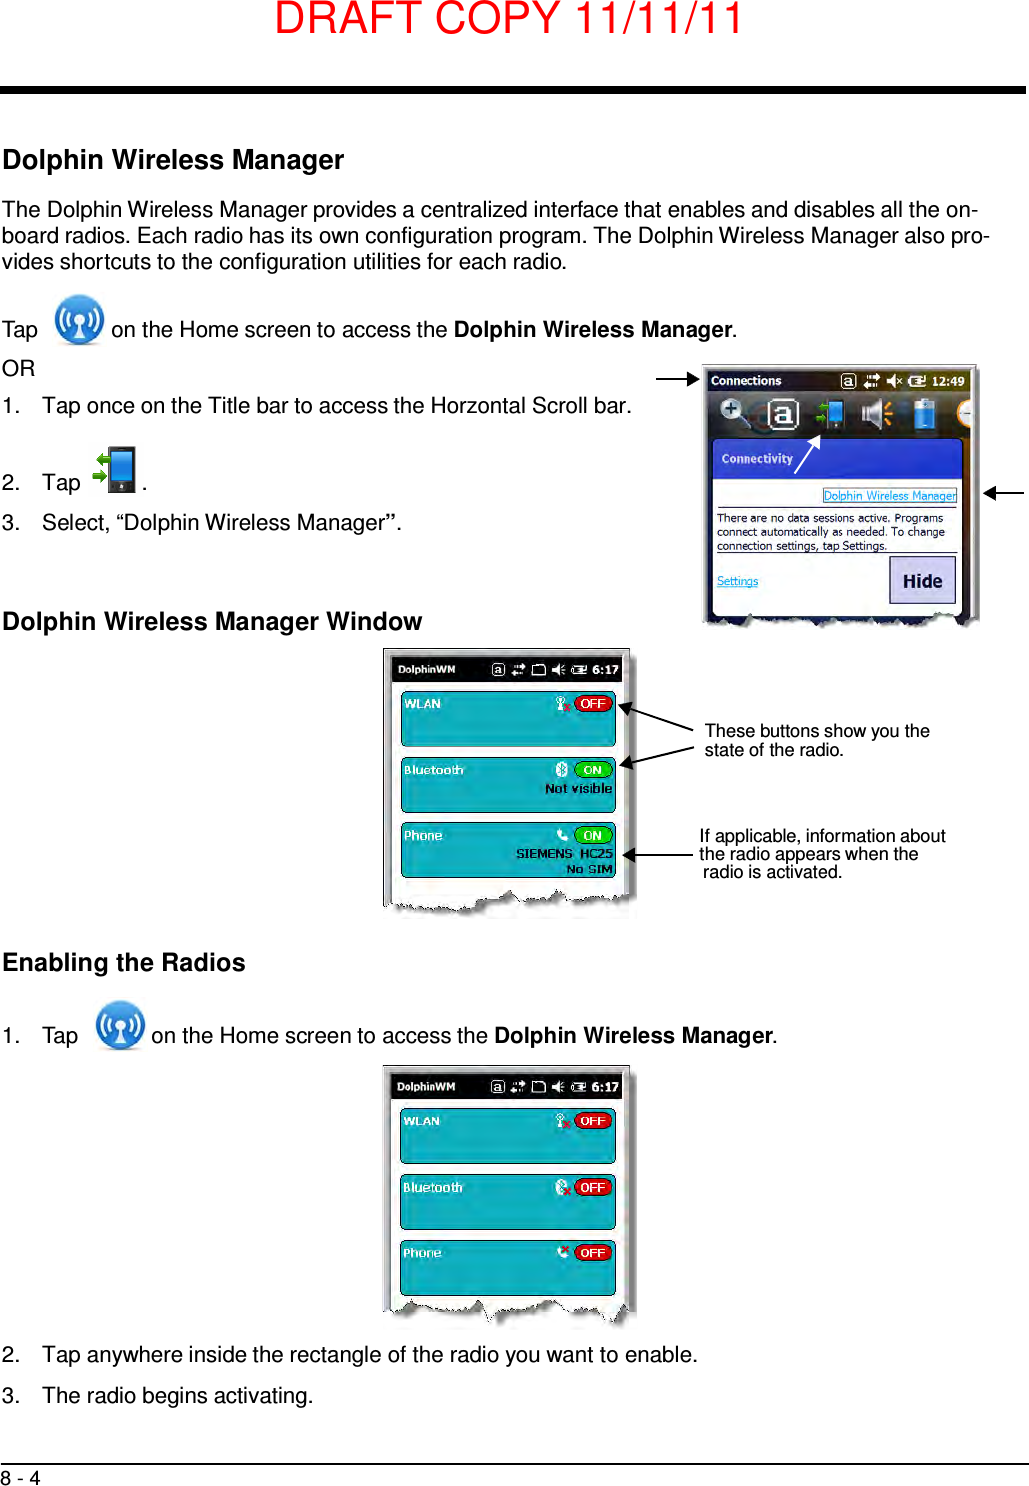 DRAFT COPY 11/11/11 8 - 4         Dolphin Wireless Manager  The Dolphin Wireless Manager provides a centralized interface that enables and disables all the on- board radios. Each radio has its own configuration program. The Dolphin Wireless Manager also pro- vides shortcuts to the configuration utilities for each radio.   Tap  on the Home screen to access the Dolphin Wireless Manager. OR 1.  Tap once on the Title bar to access the Horzontal Scroll bar.    2.  Tap  .  3.  Select, “Dolphin Wireless Manager”.    Dolphin Wireless Manager Window     These buttons show you the state of the radio.    If applicable, information about the radio appears when the radio is activated.    Enabling the Radios   1.  Tap  on the Home screen to access the Dolphin Wireless Manager.               2.  Tap anywhere inside the rectangle of the radio you want to enable.  3.  The radio begins activating. 